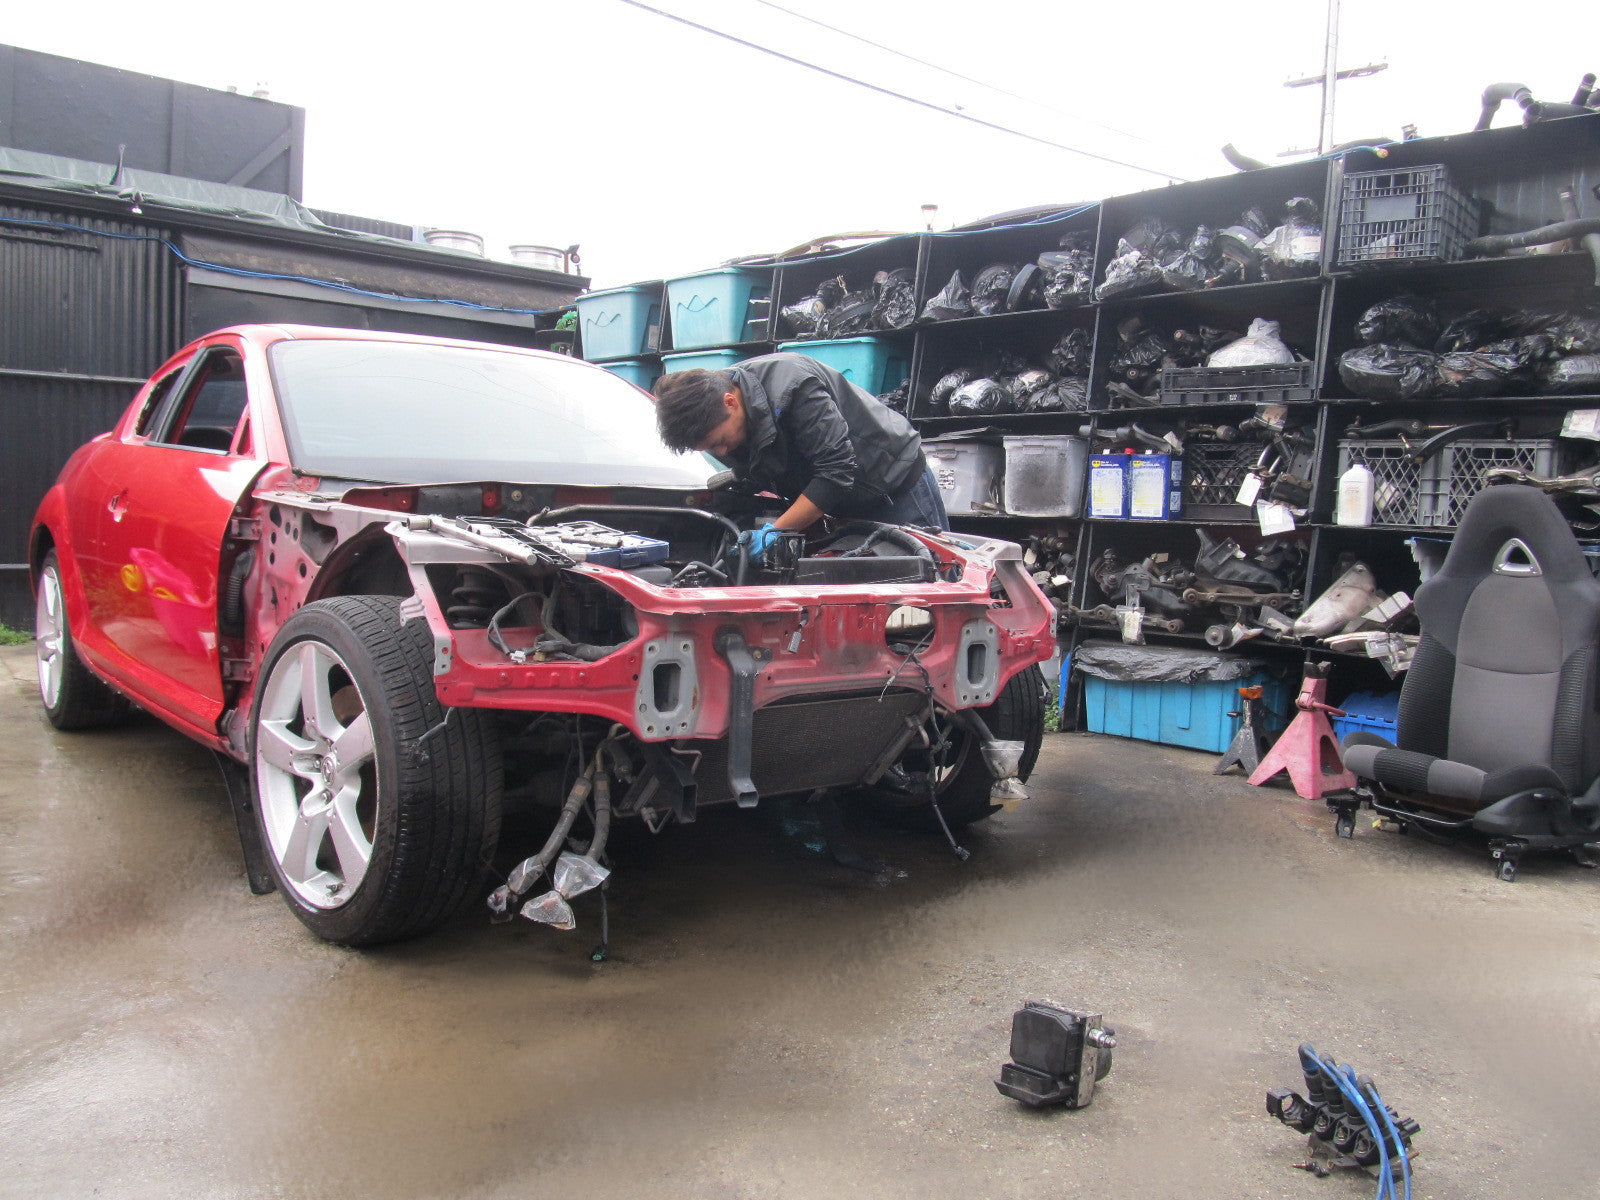 2004 Mazda RX8 A/T 4 Ports 1.3L Renesis - Ap1 Project Picture Gallery